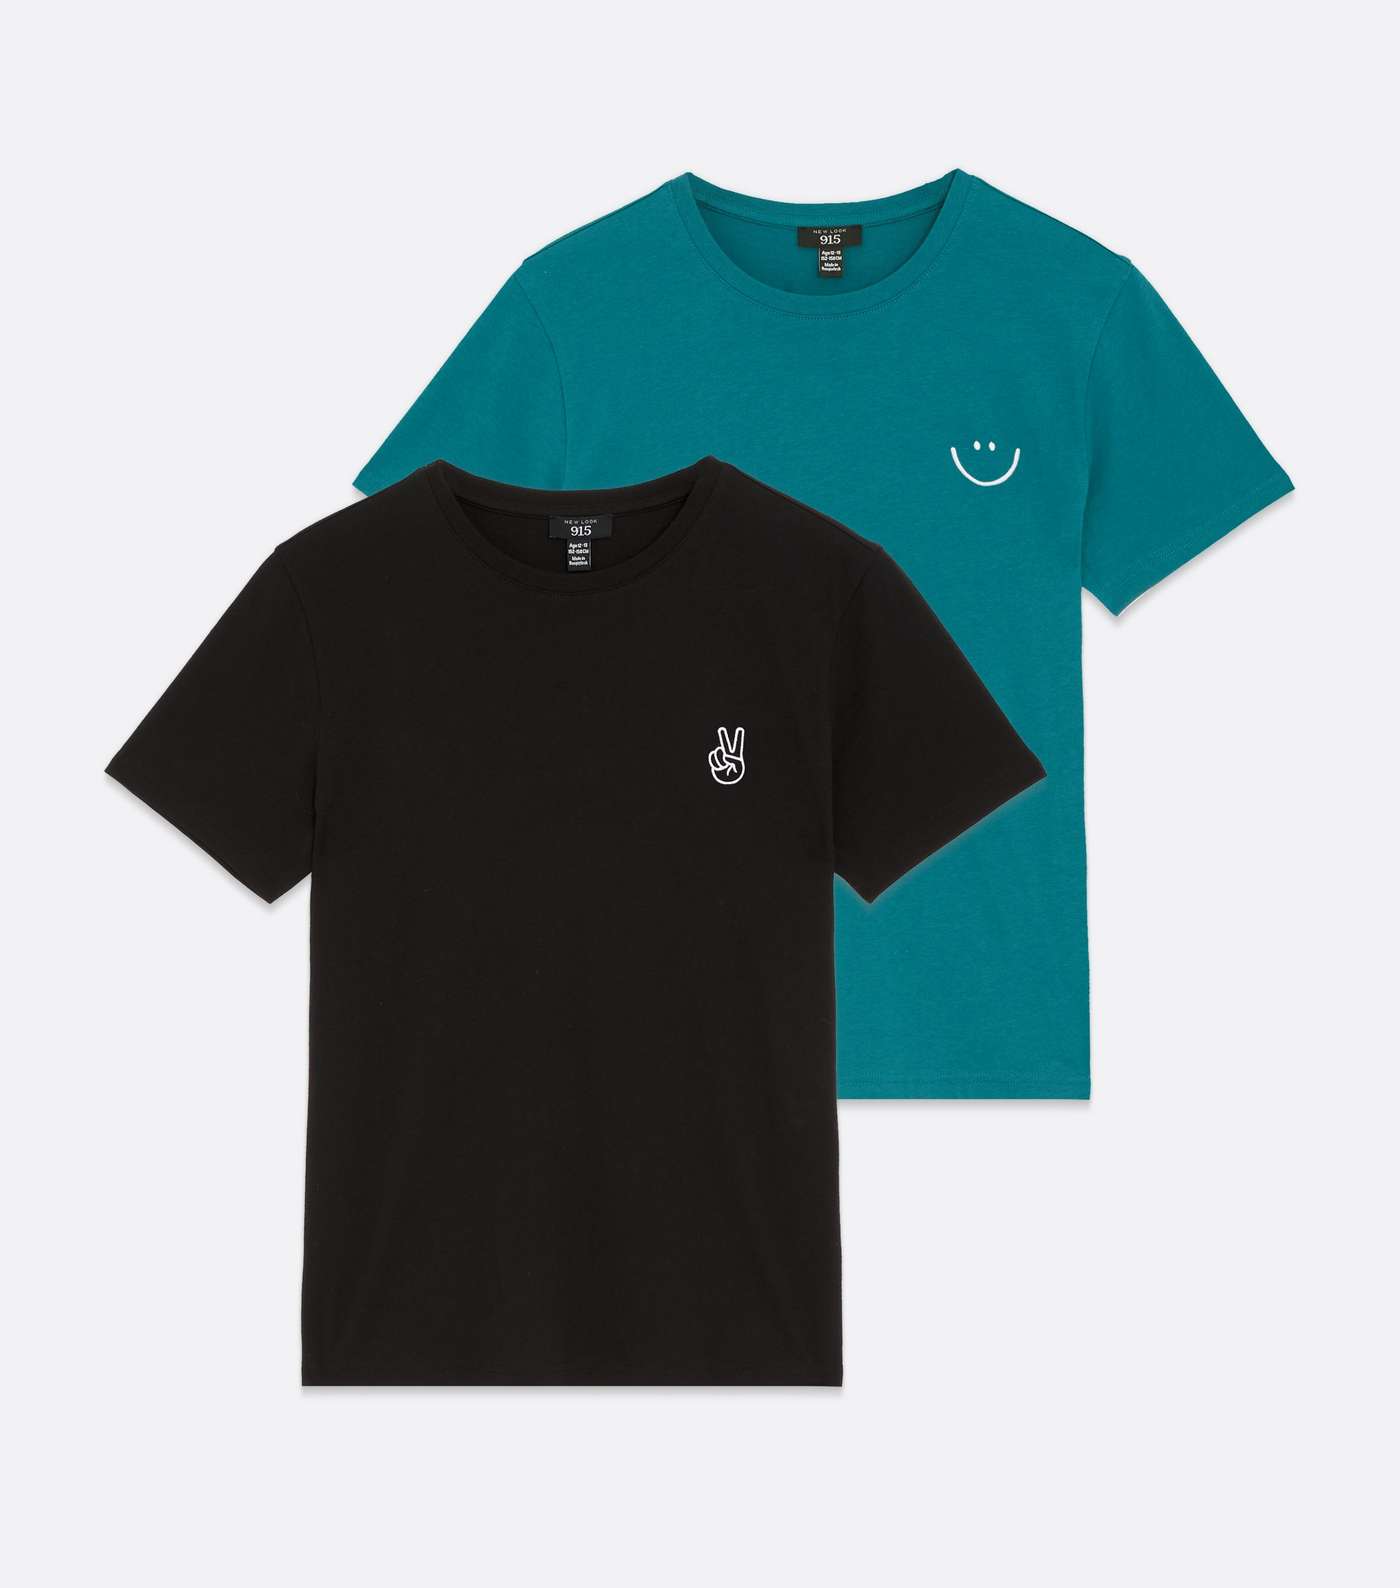 Boys 2 Pack Teal and Black Mixed Embroidered T-Shirts Image 5